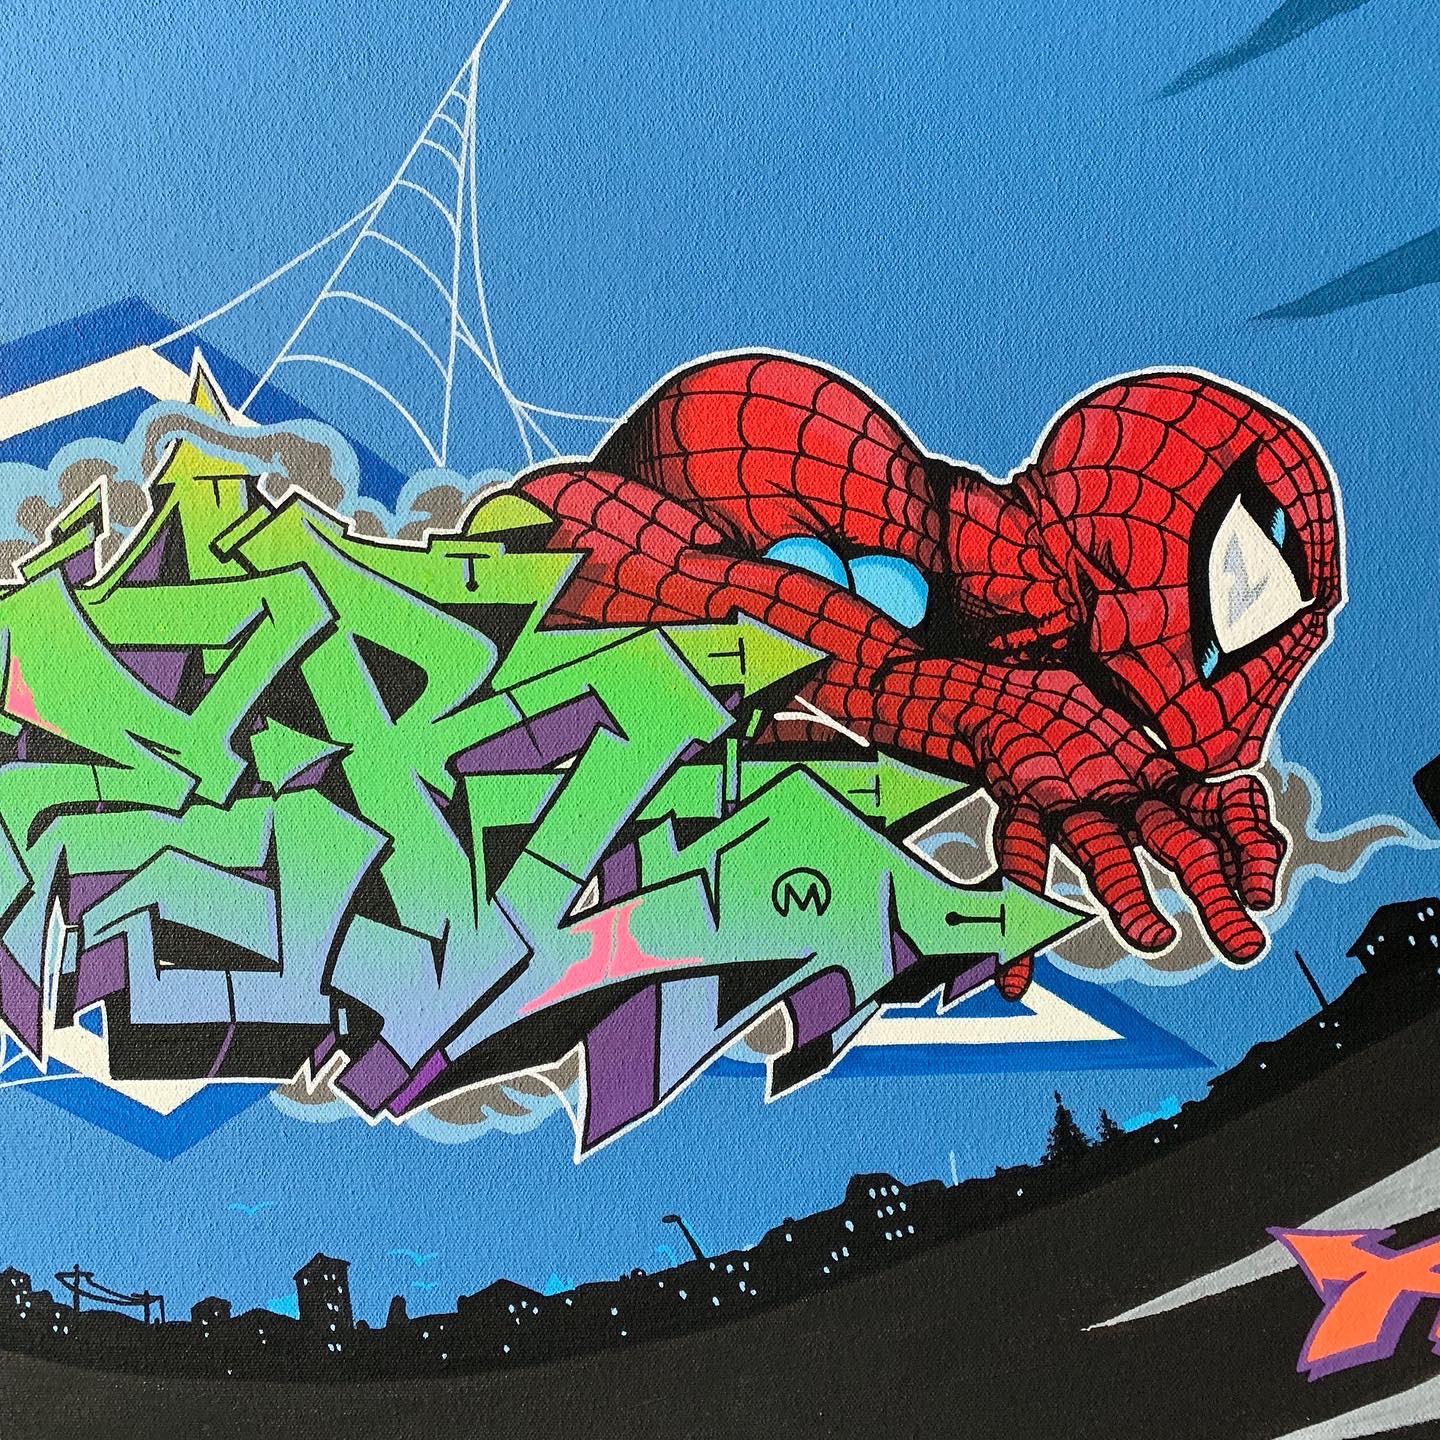 Spider-Man x Nover Details on 36 x 48' Canvas, Paint and Markers. 2019.